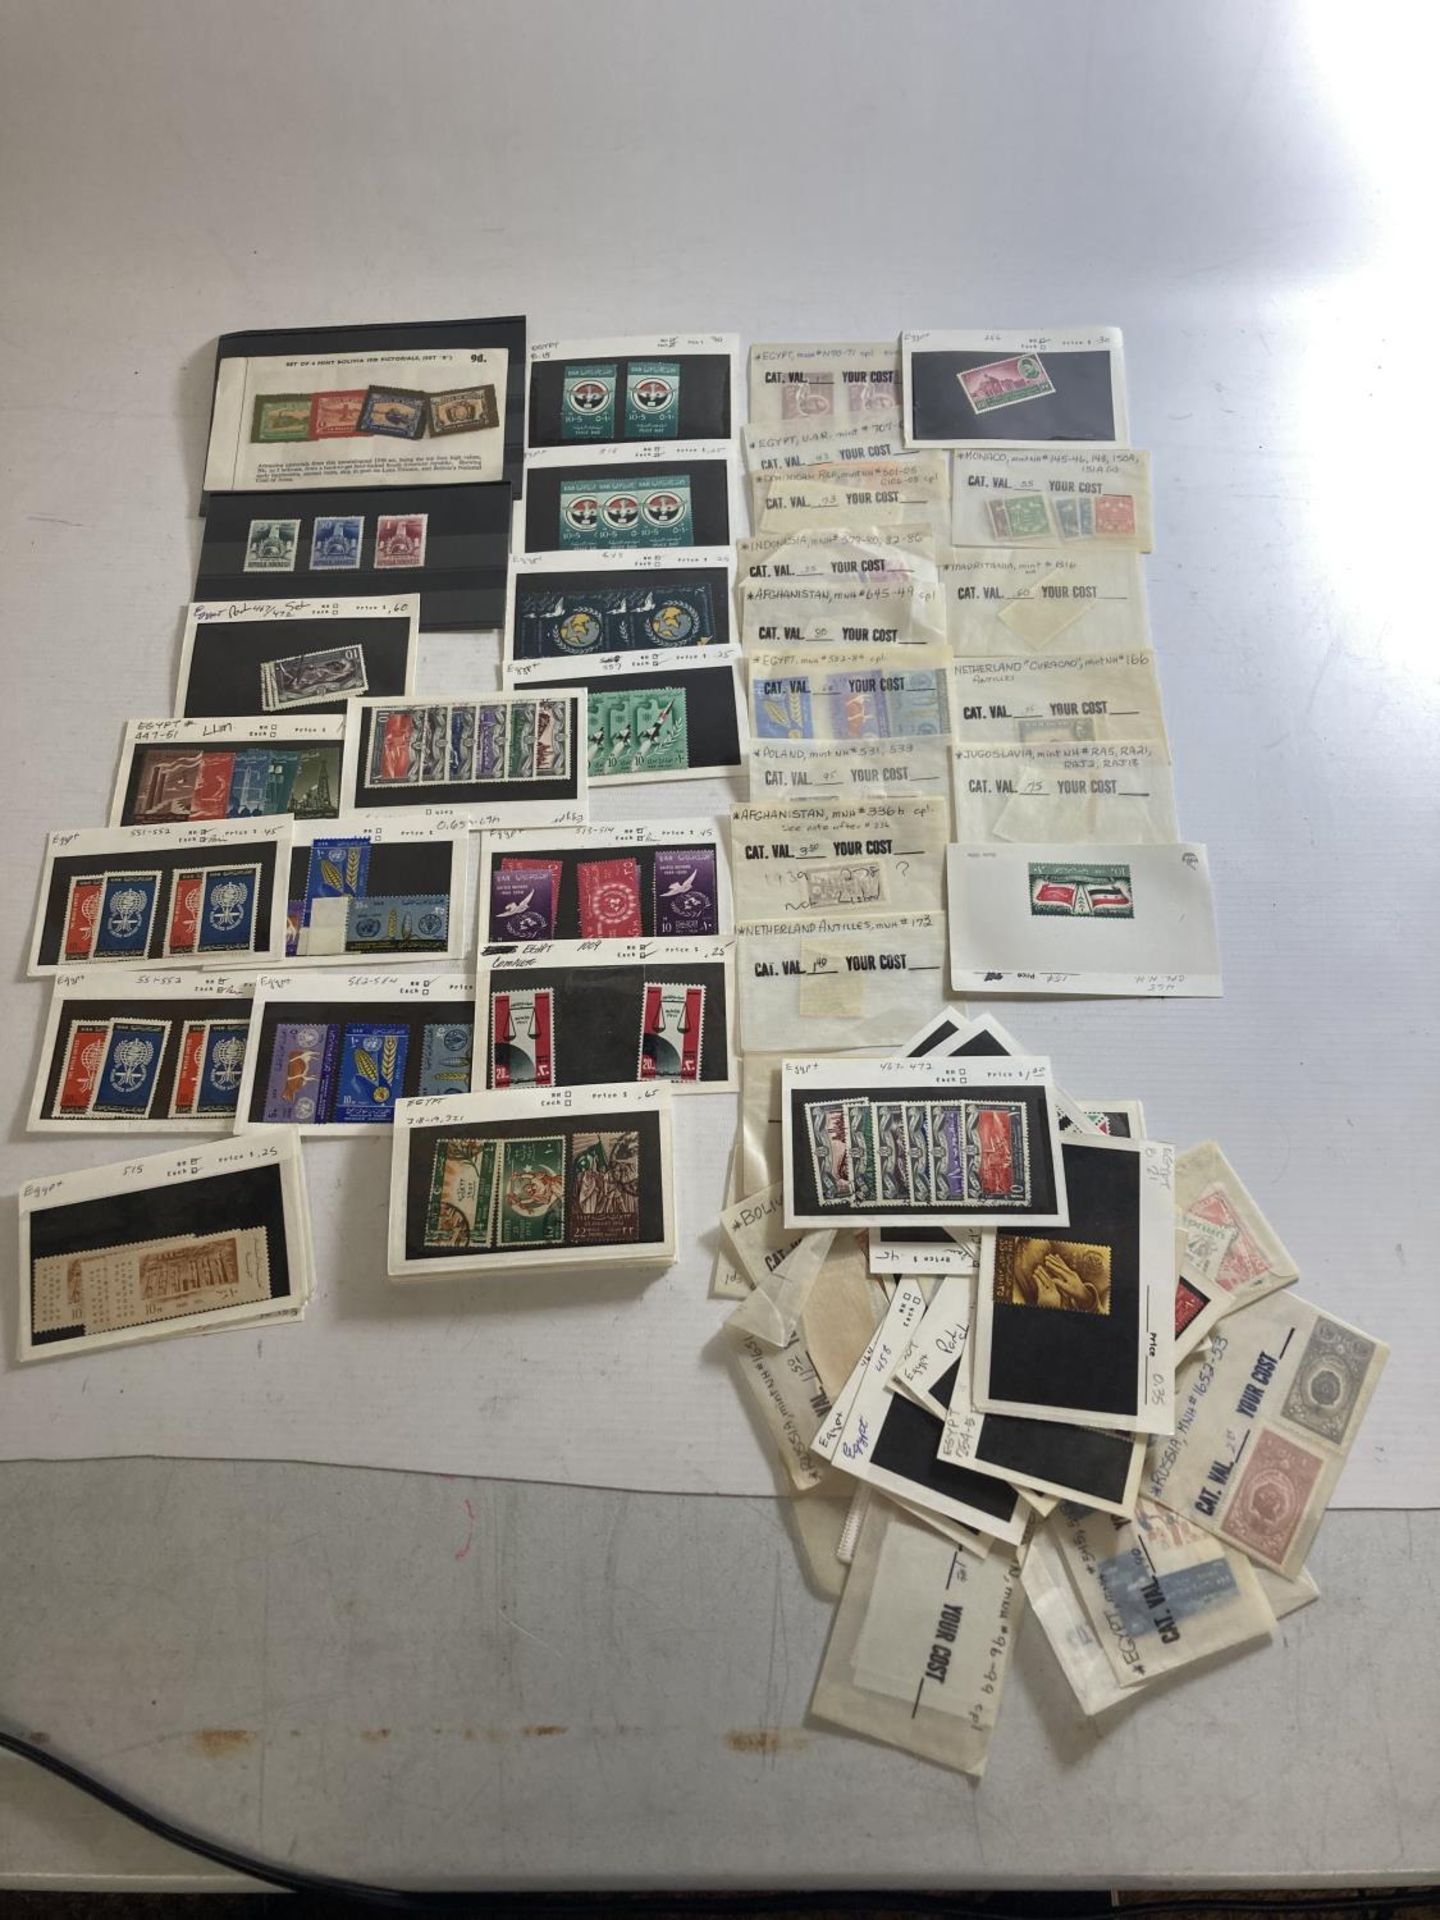 A MIXED LOT OF STAMPS TO INCLUDE EGYPT, POLAND INDONESIA, AFGHANISTAN, RUSSIA, MAURITANIA ETC MANY